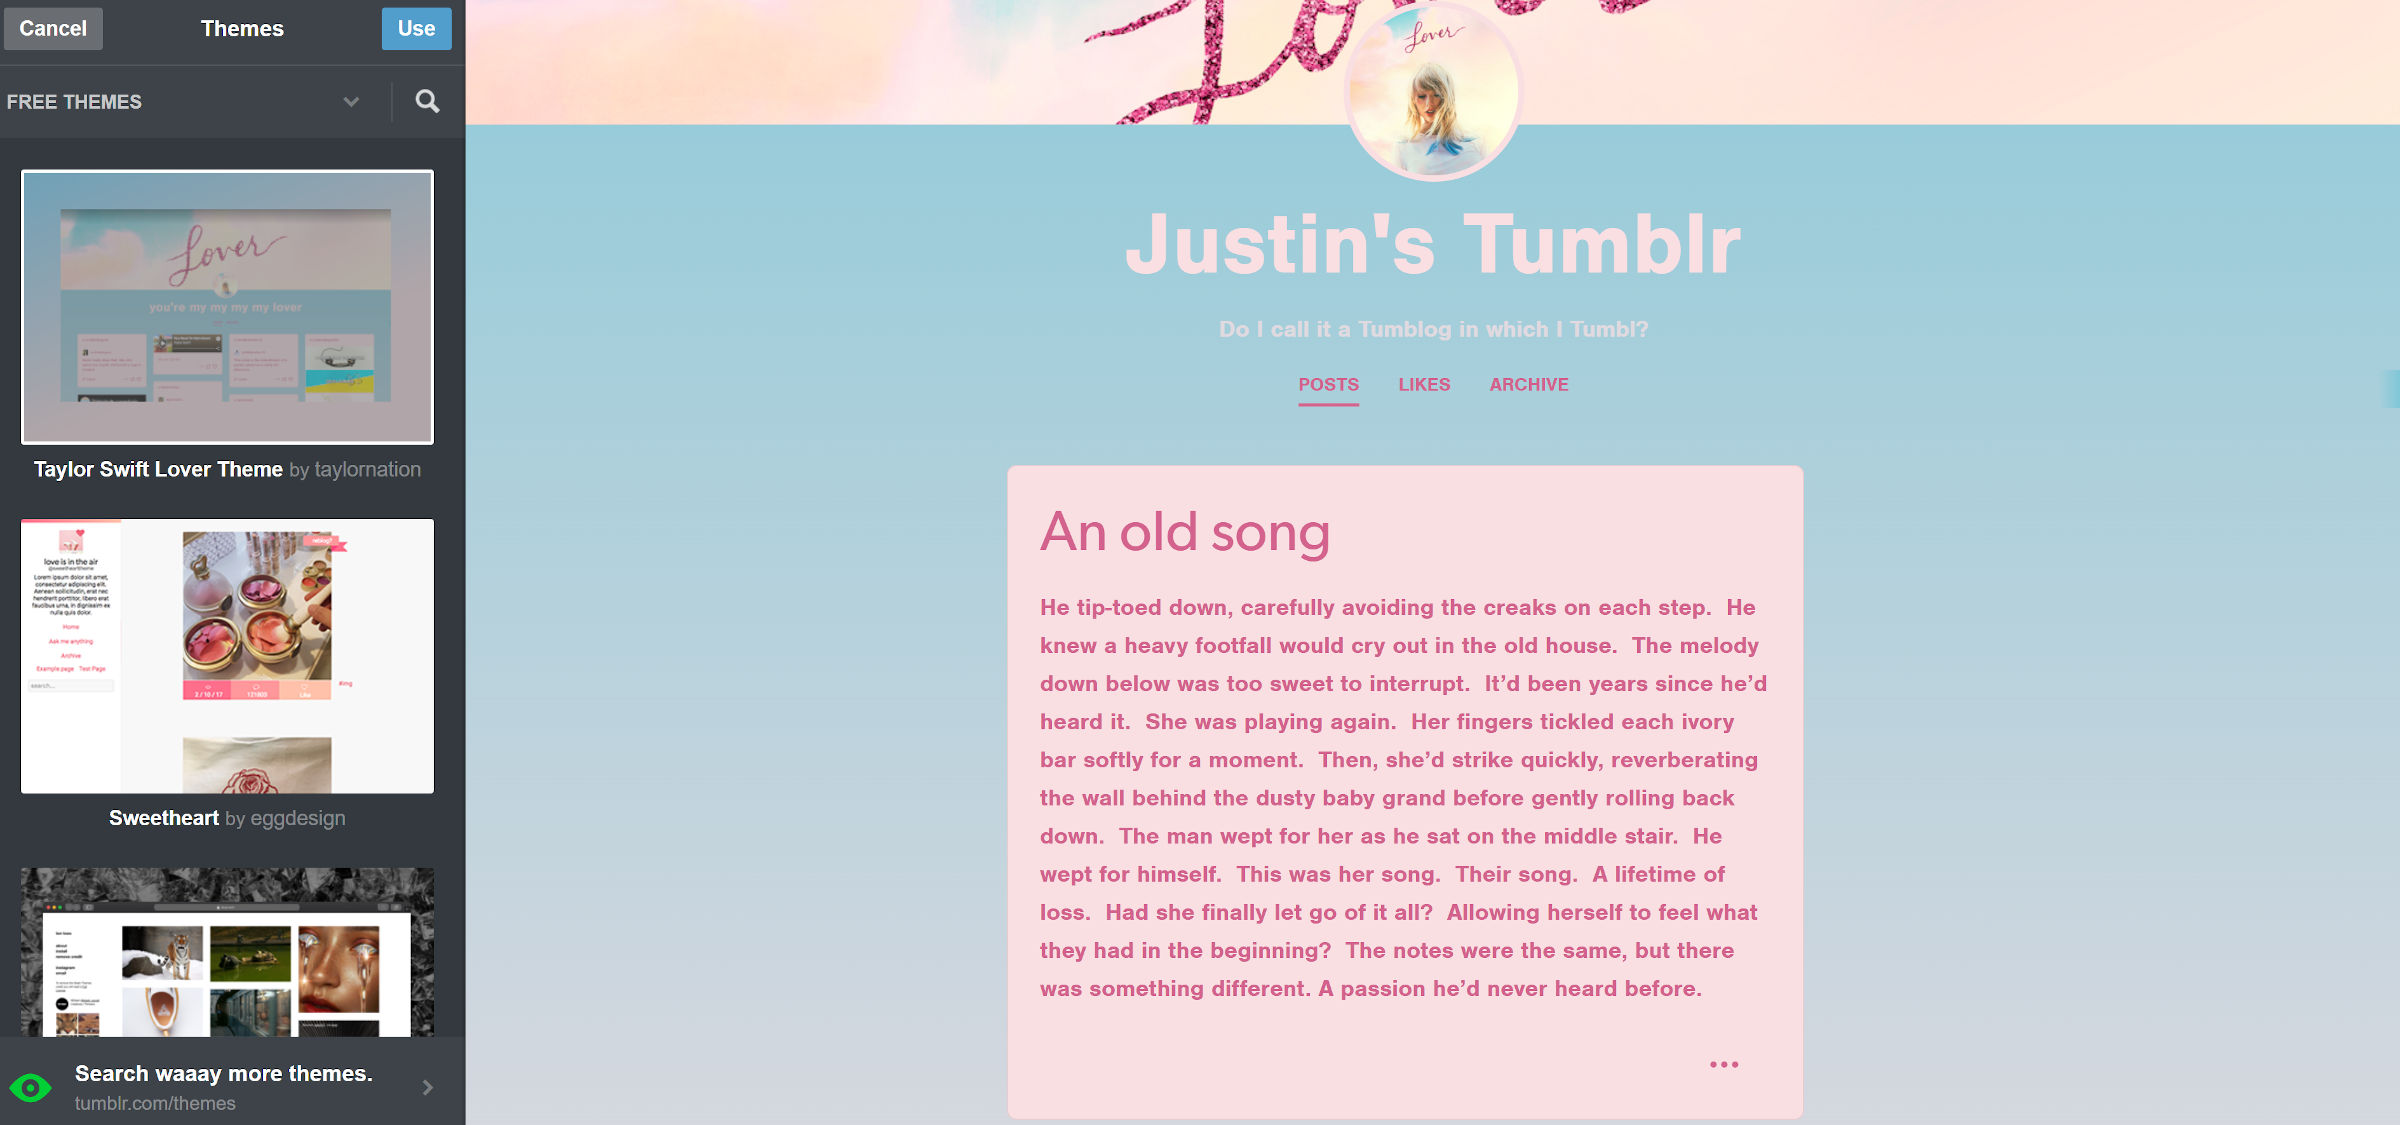 jt-tumblr-tswift Ask the Bartender: Are There Any Compact and Personal Block Themes? design tips